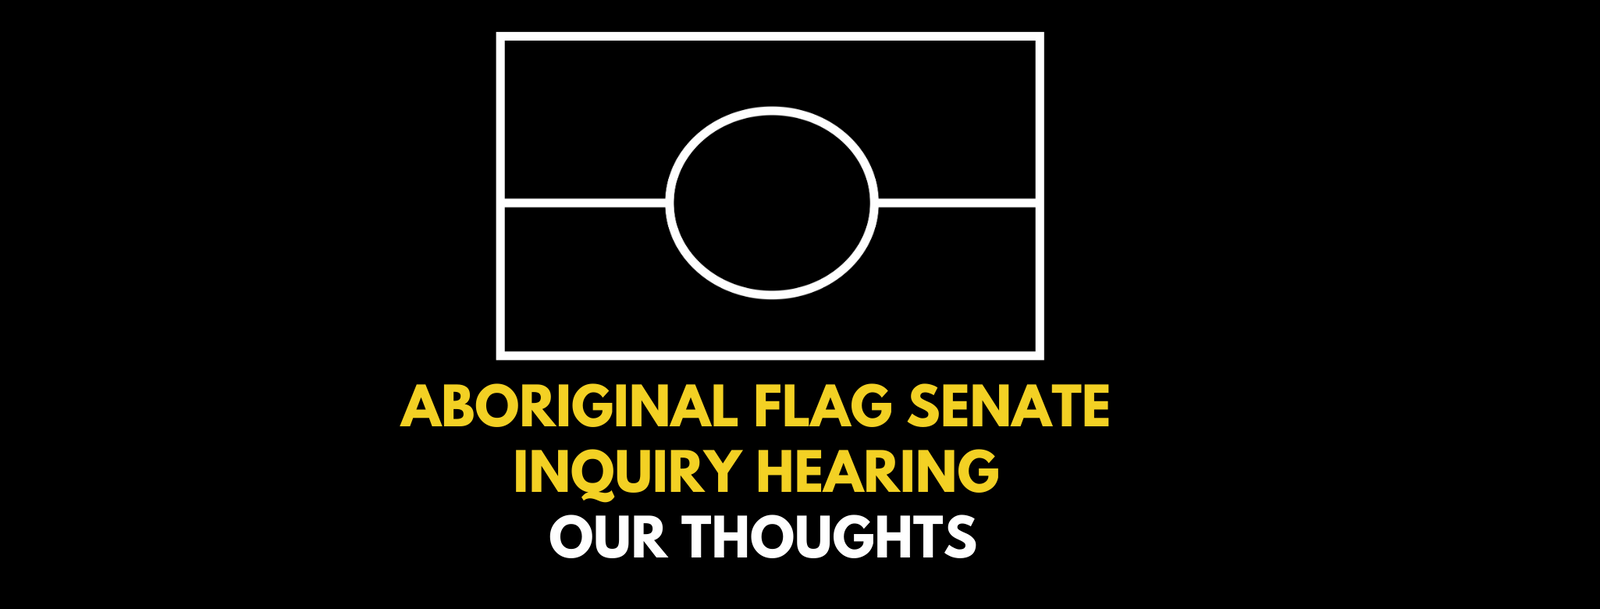 Aboriginal Flag Senate Inquiry Hearing: Our thoughts